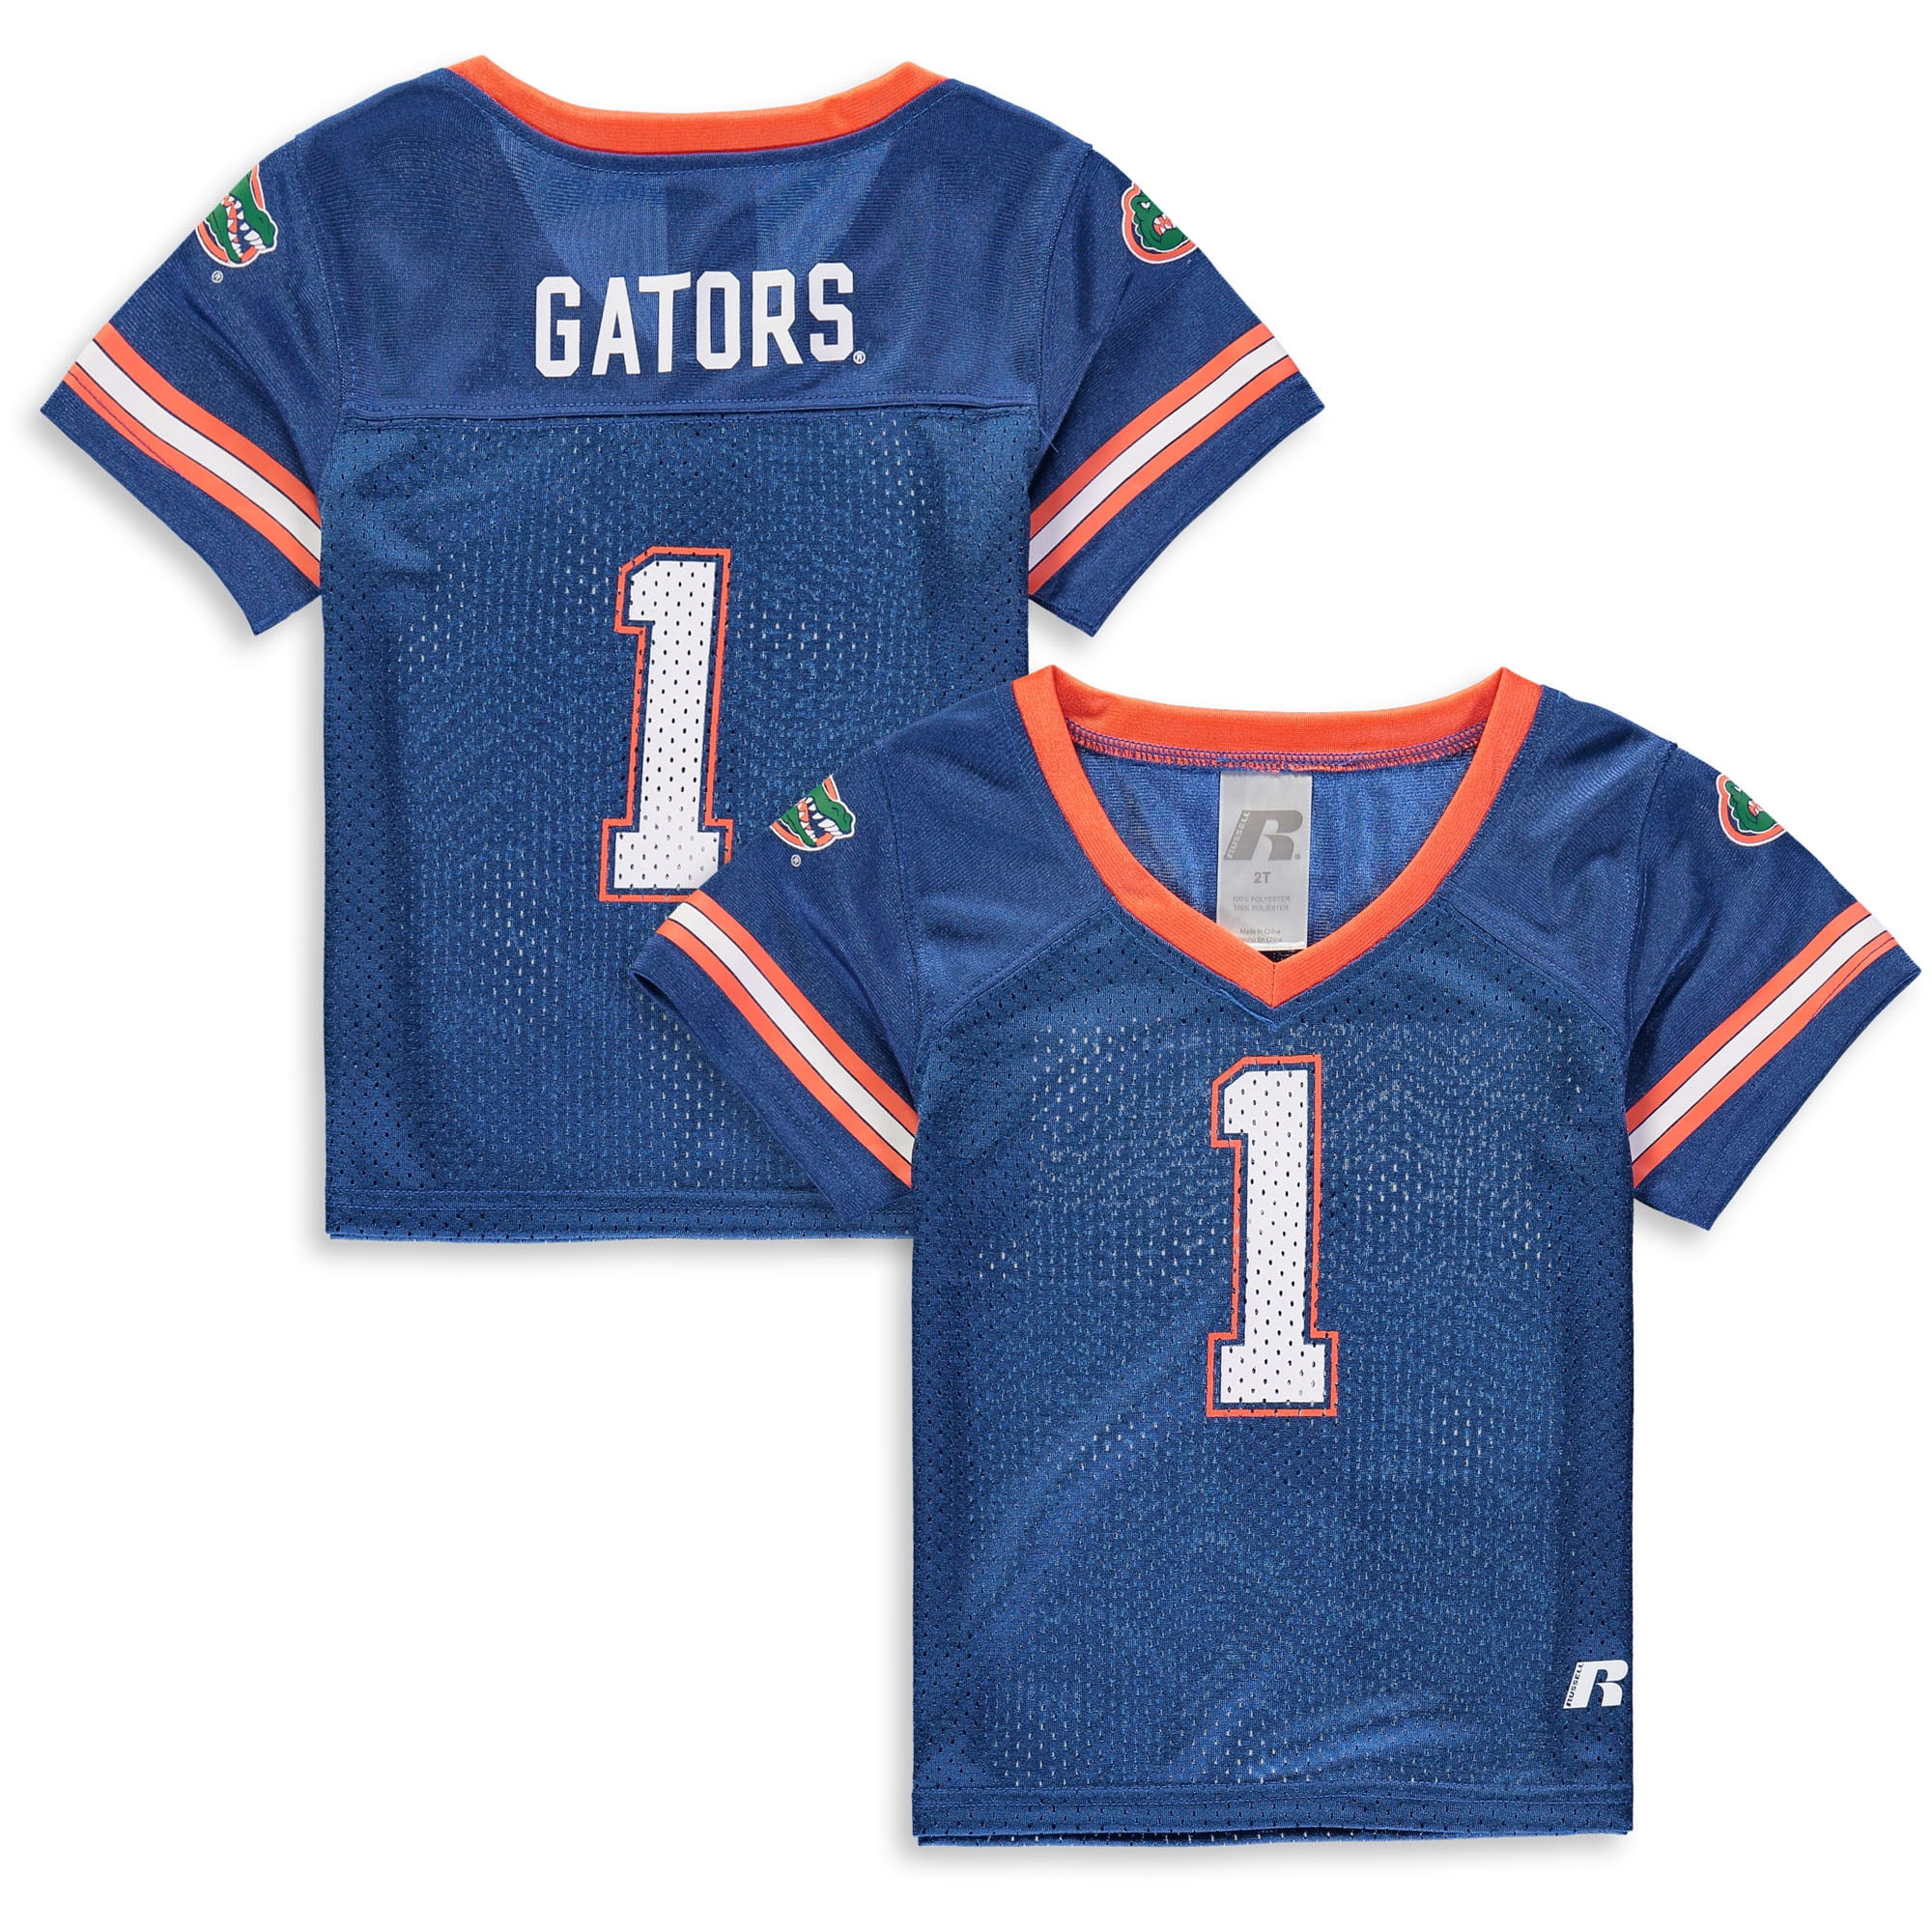 Toddler Russell Athletic Royal Florida Gators Replica Football Jersey